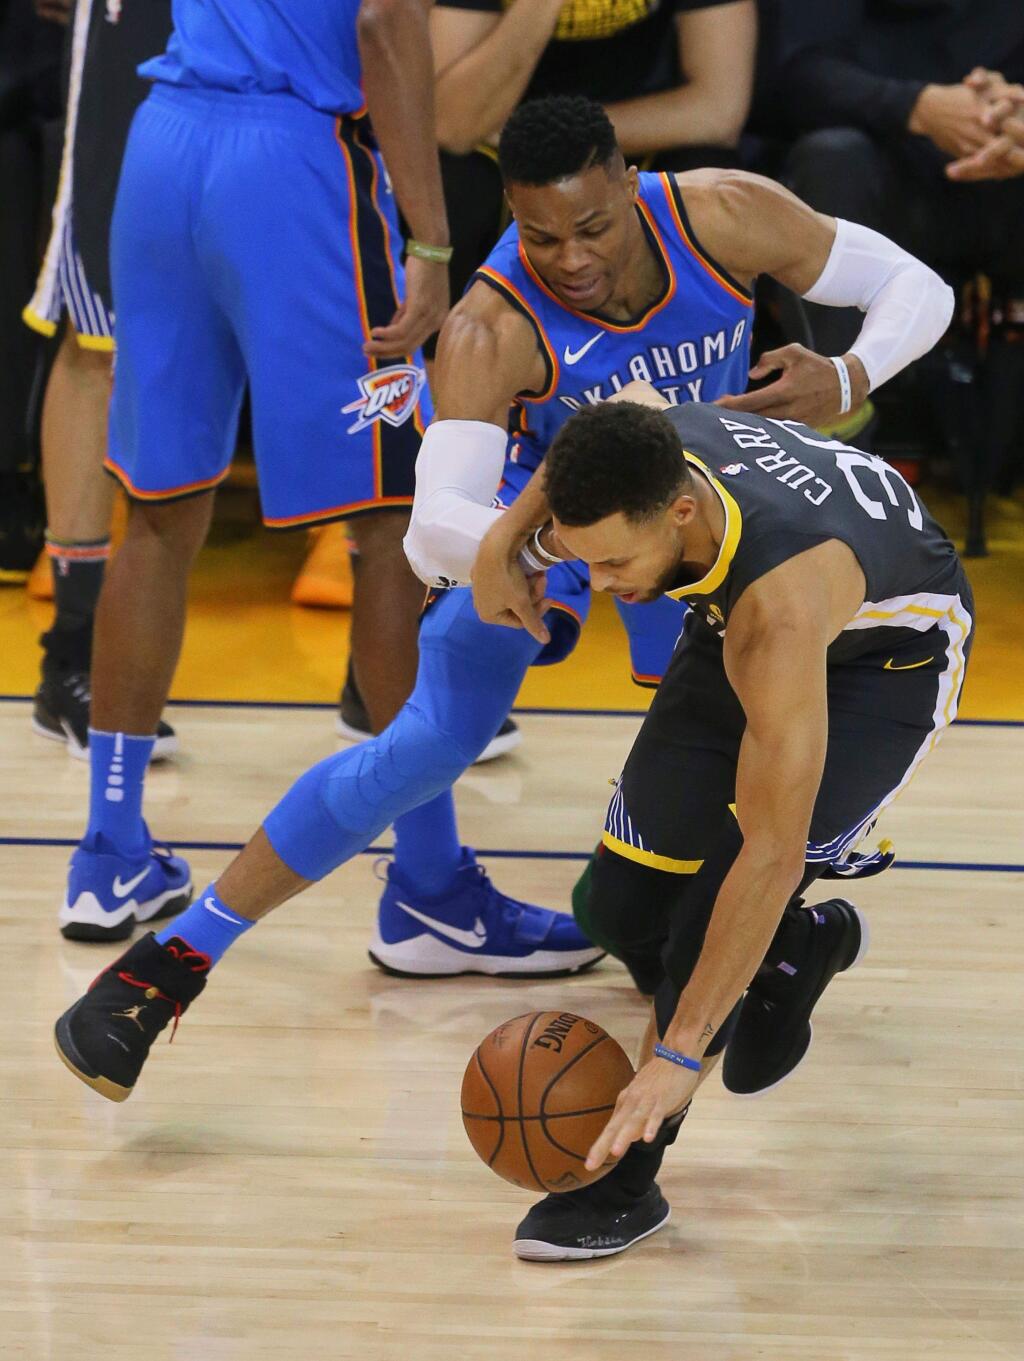 Golden State Warriors guard Stephen Curry loses the ball while trying to drive past Oklahoma City Thunder guard Russell Westbrook in Oakland on Tuesday, Feb. 6, 2018. (Christopher Chung / The Press Democrat)